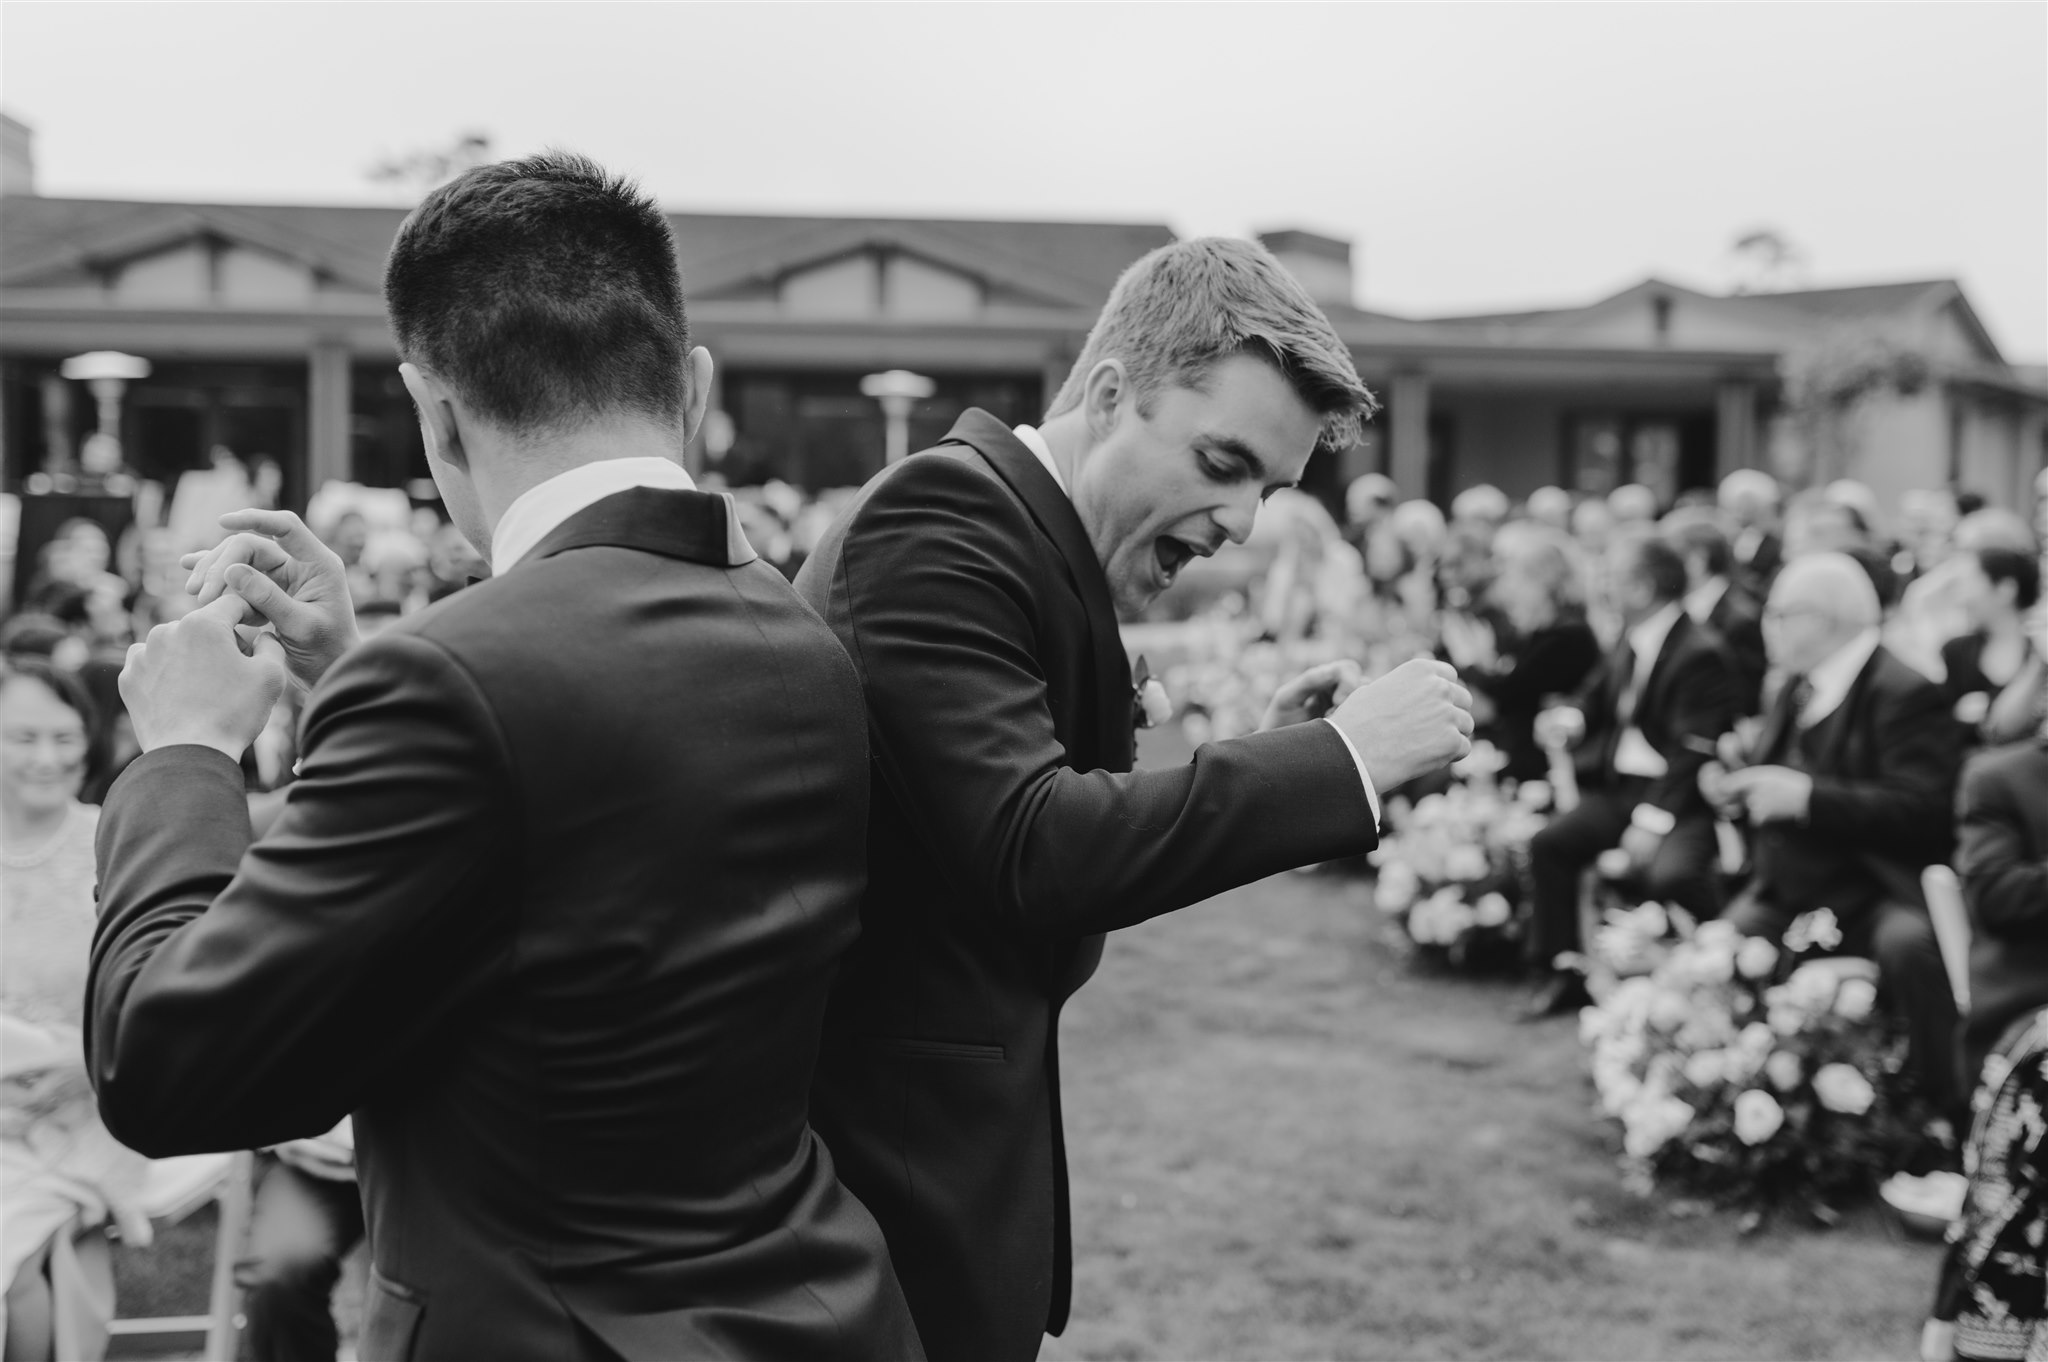 groom and groomsman greeting at the alter wedding ceremony black and white wedding portrait best friends 